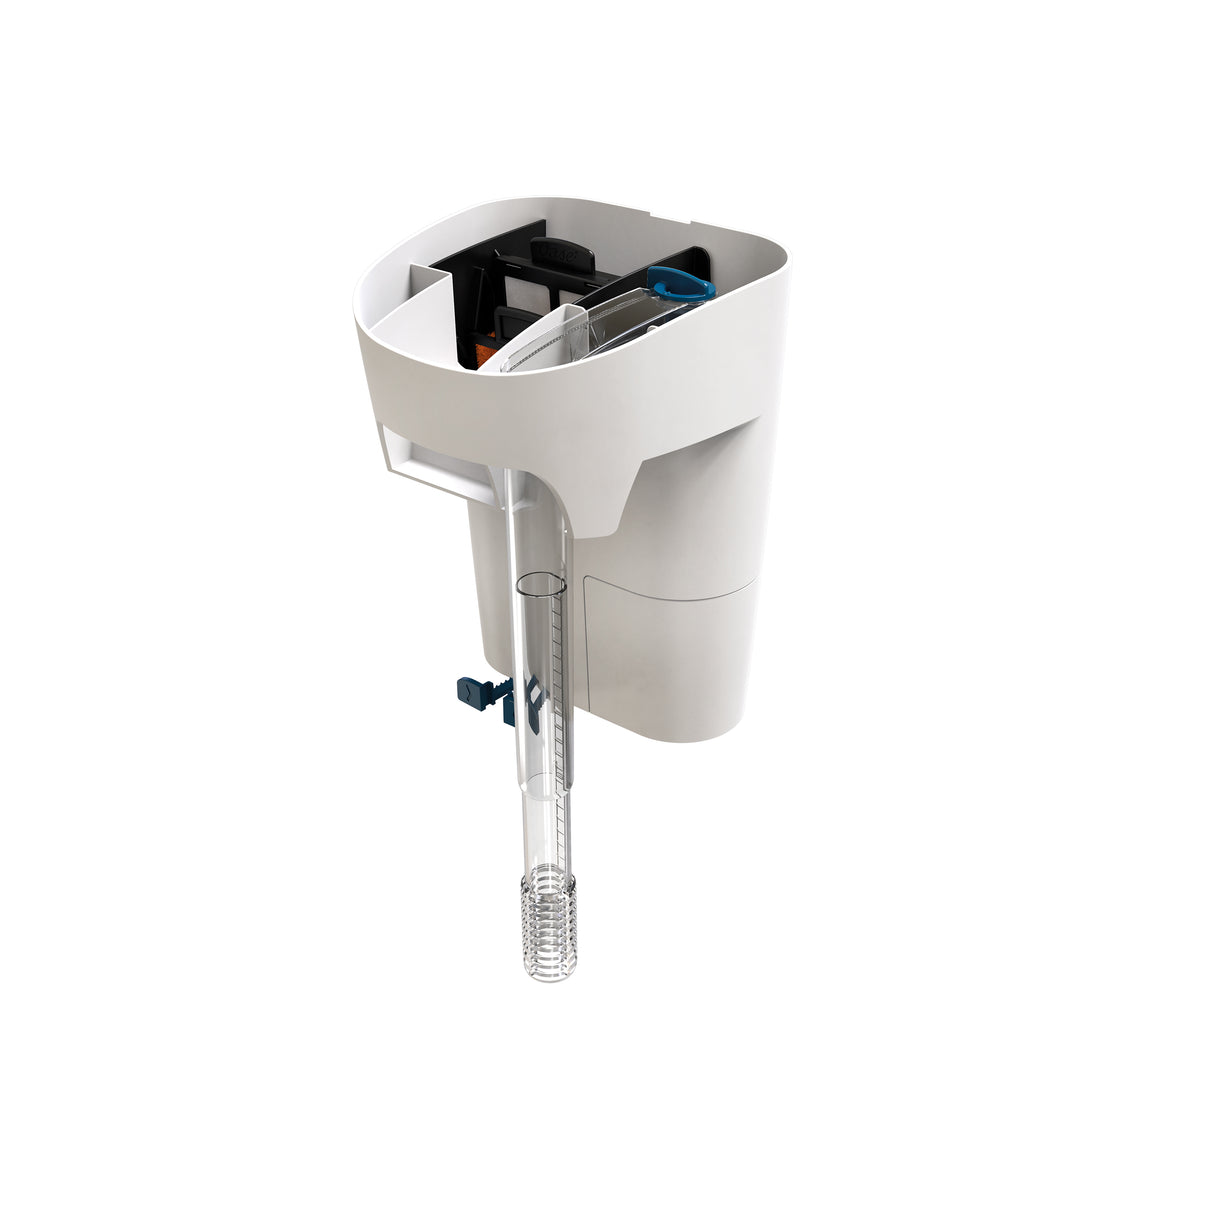 OASE BioStyle 20 White features Multi-Stage Filtration